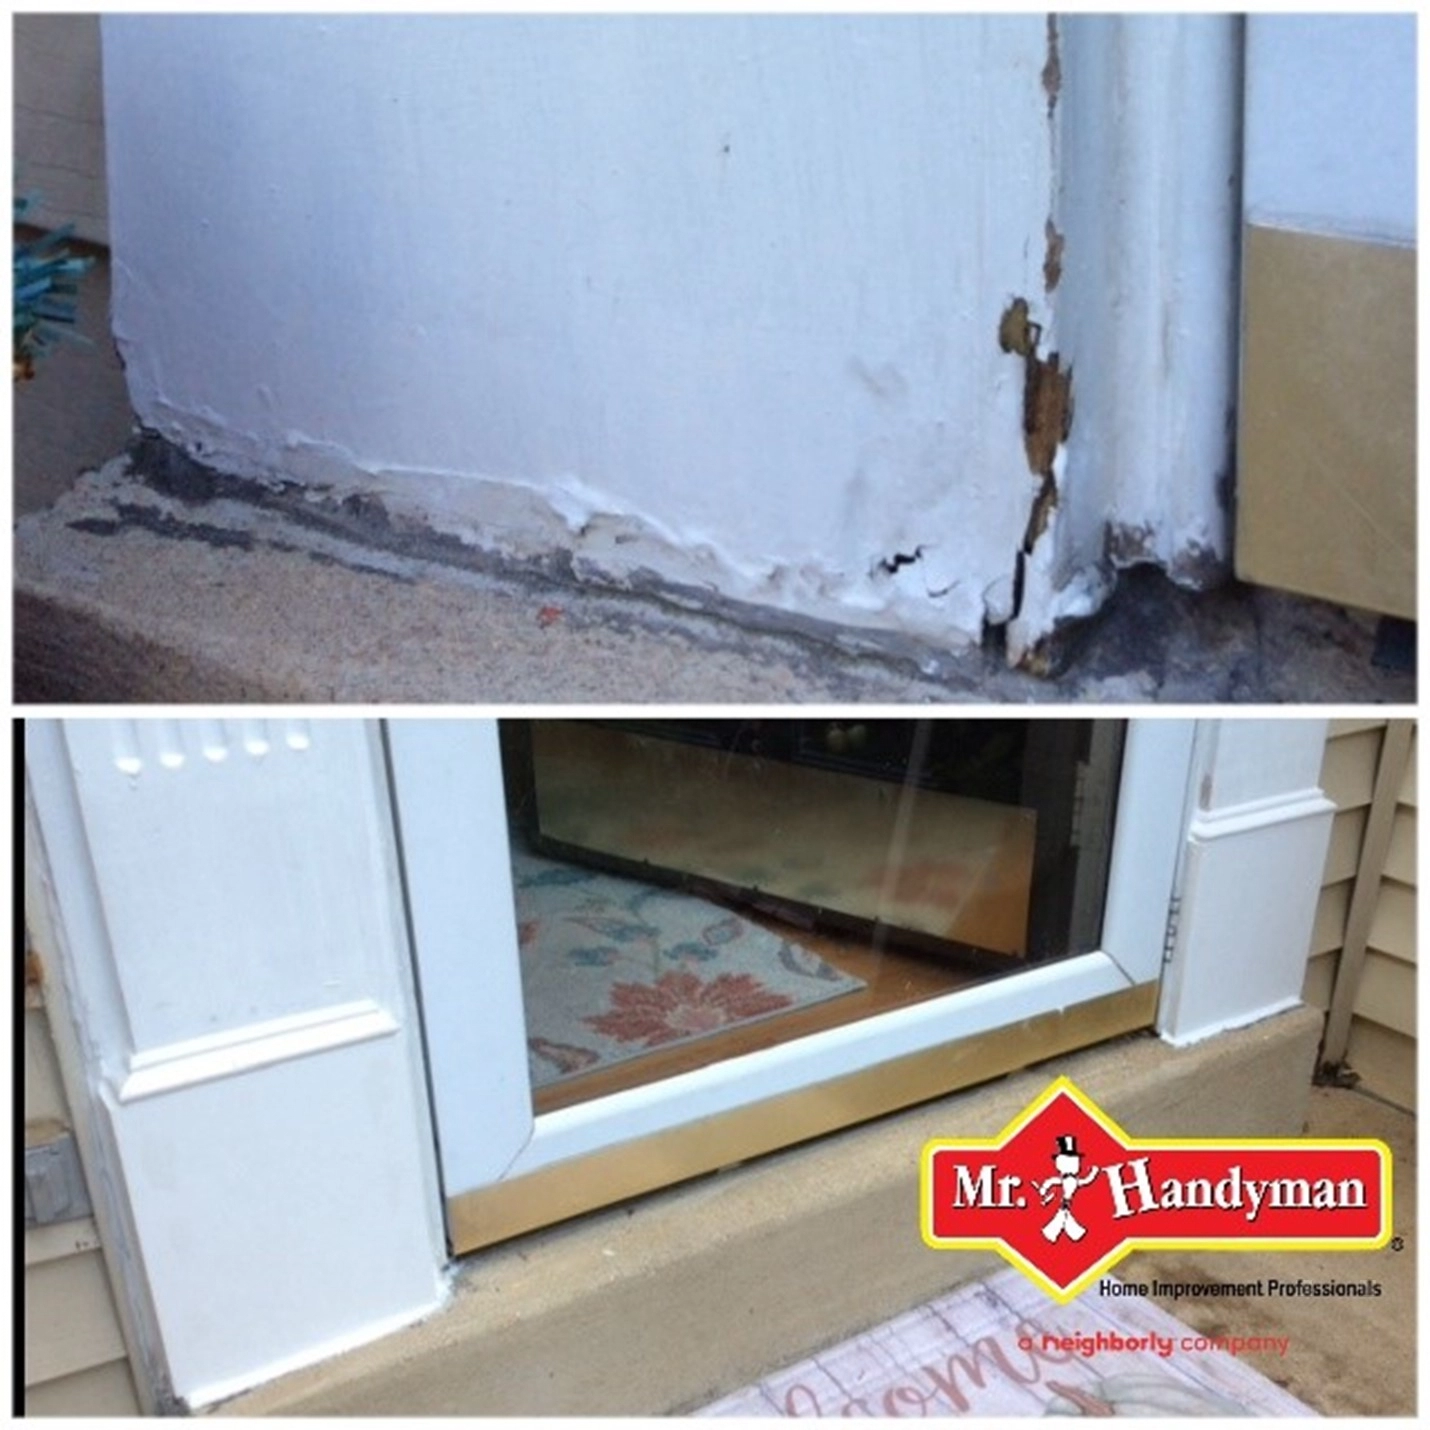 The bottom of a rotted door frame before and after it has been repaired by Mr. Handyman.